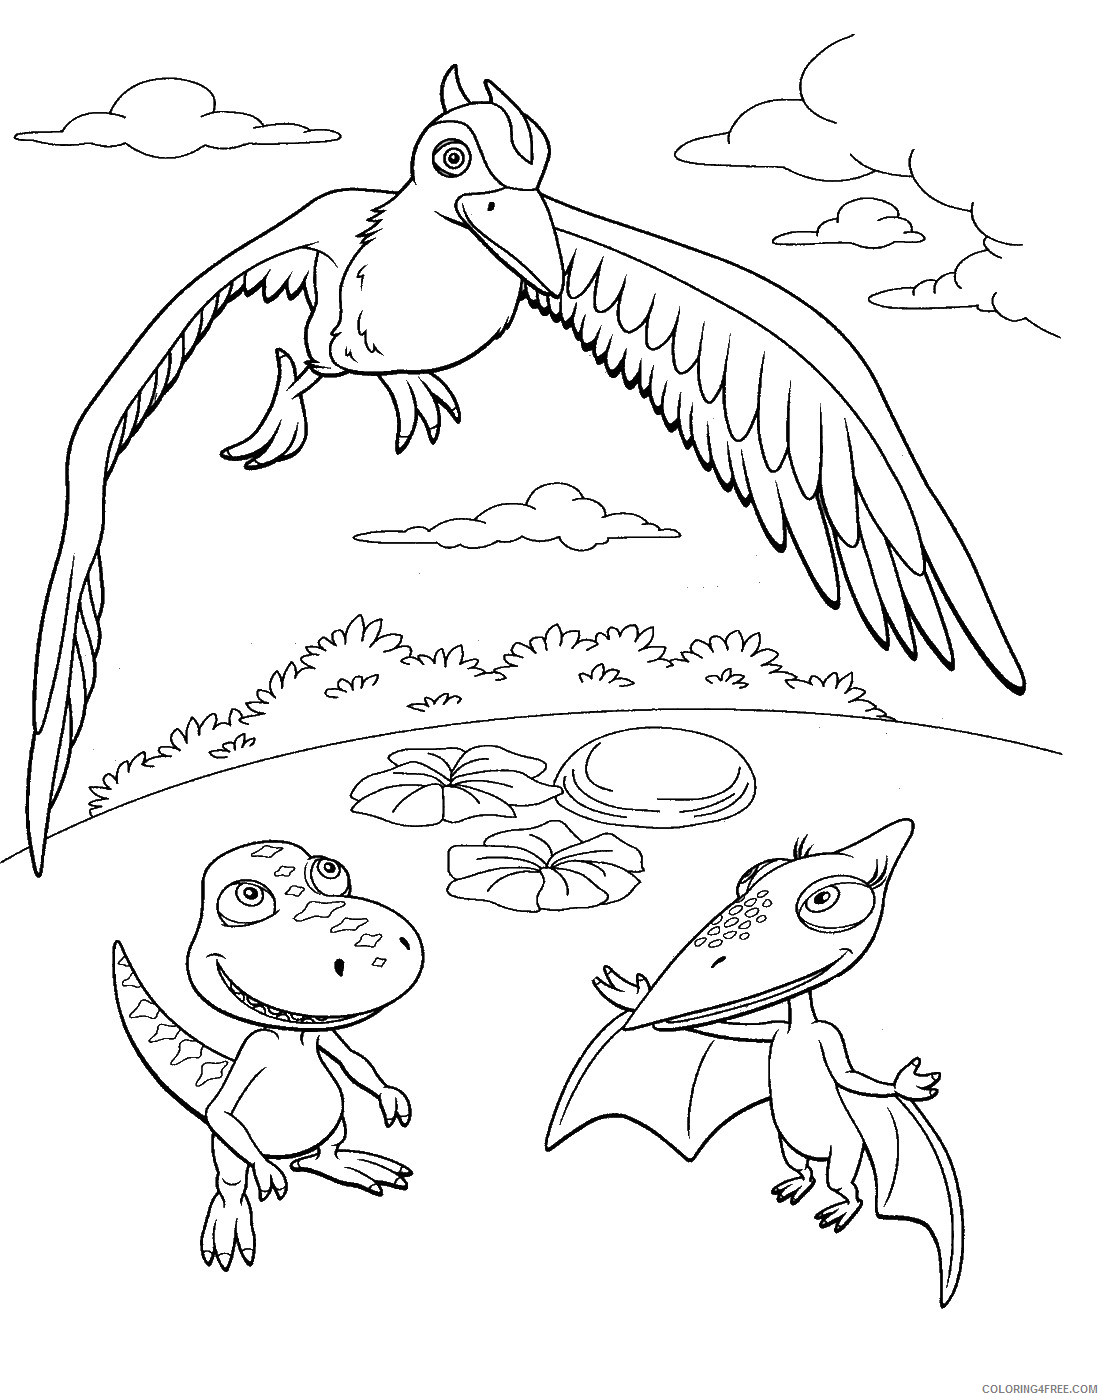 Dinosaur Train Coloring Pages Cartoons dino_train_cl_25 Printable 2020 2246 Coloring4free